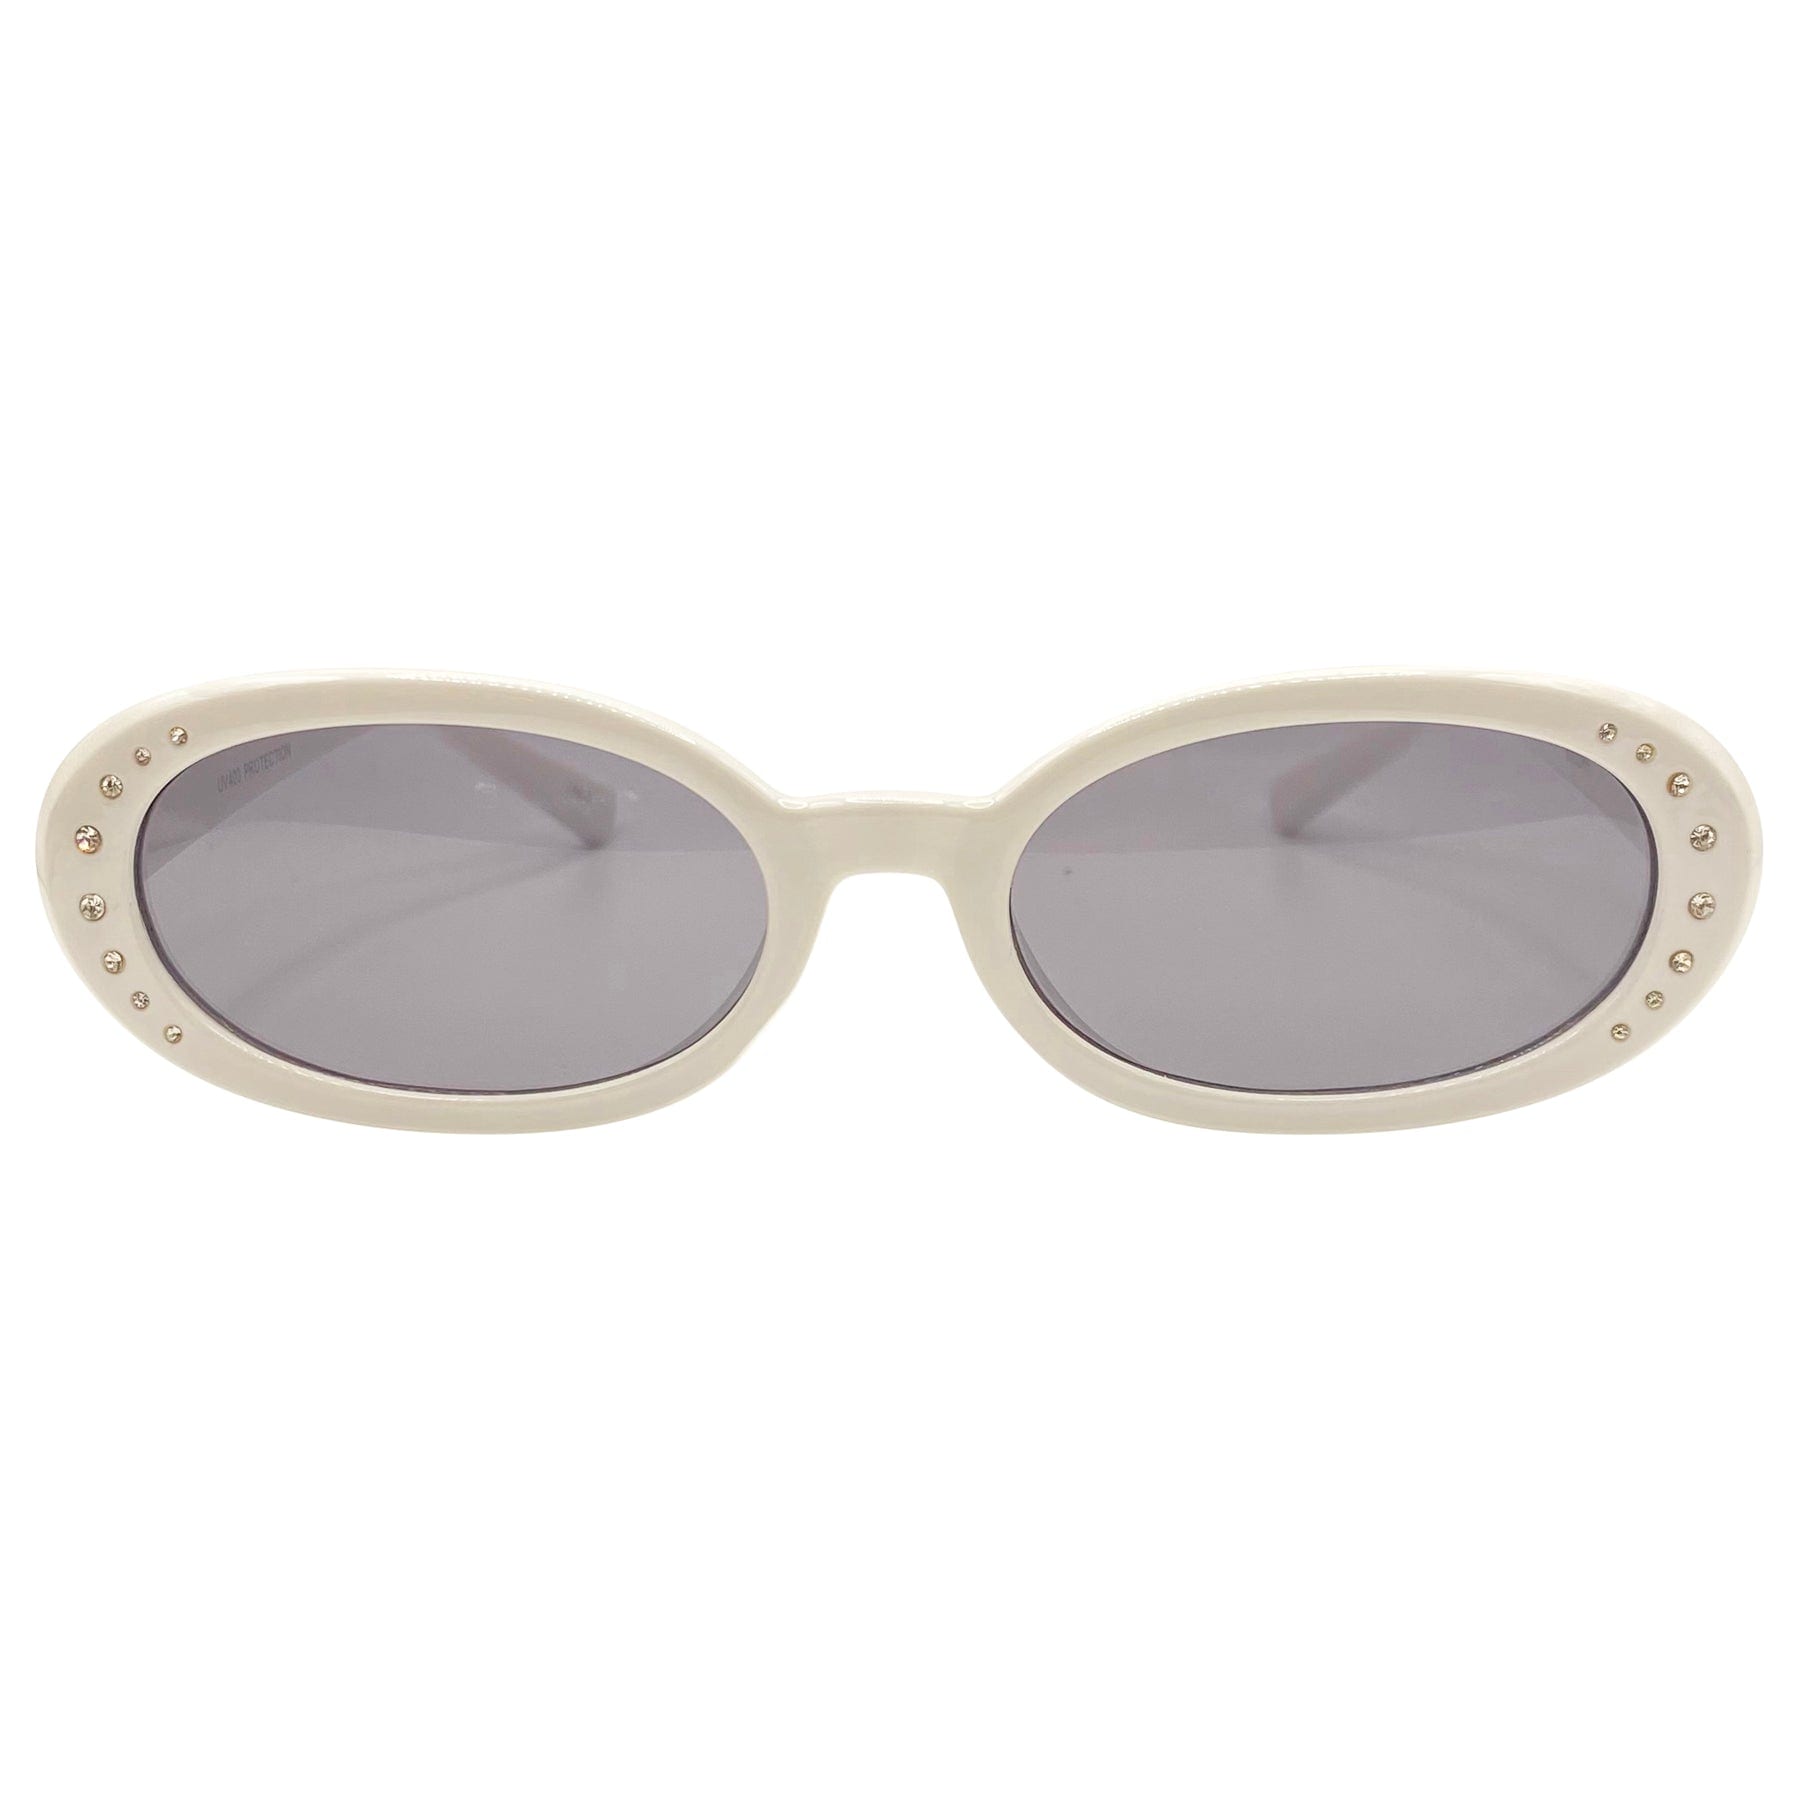 90s style retro sunglasses with rhinestones and a rounded oval shape frame